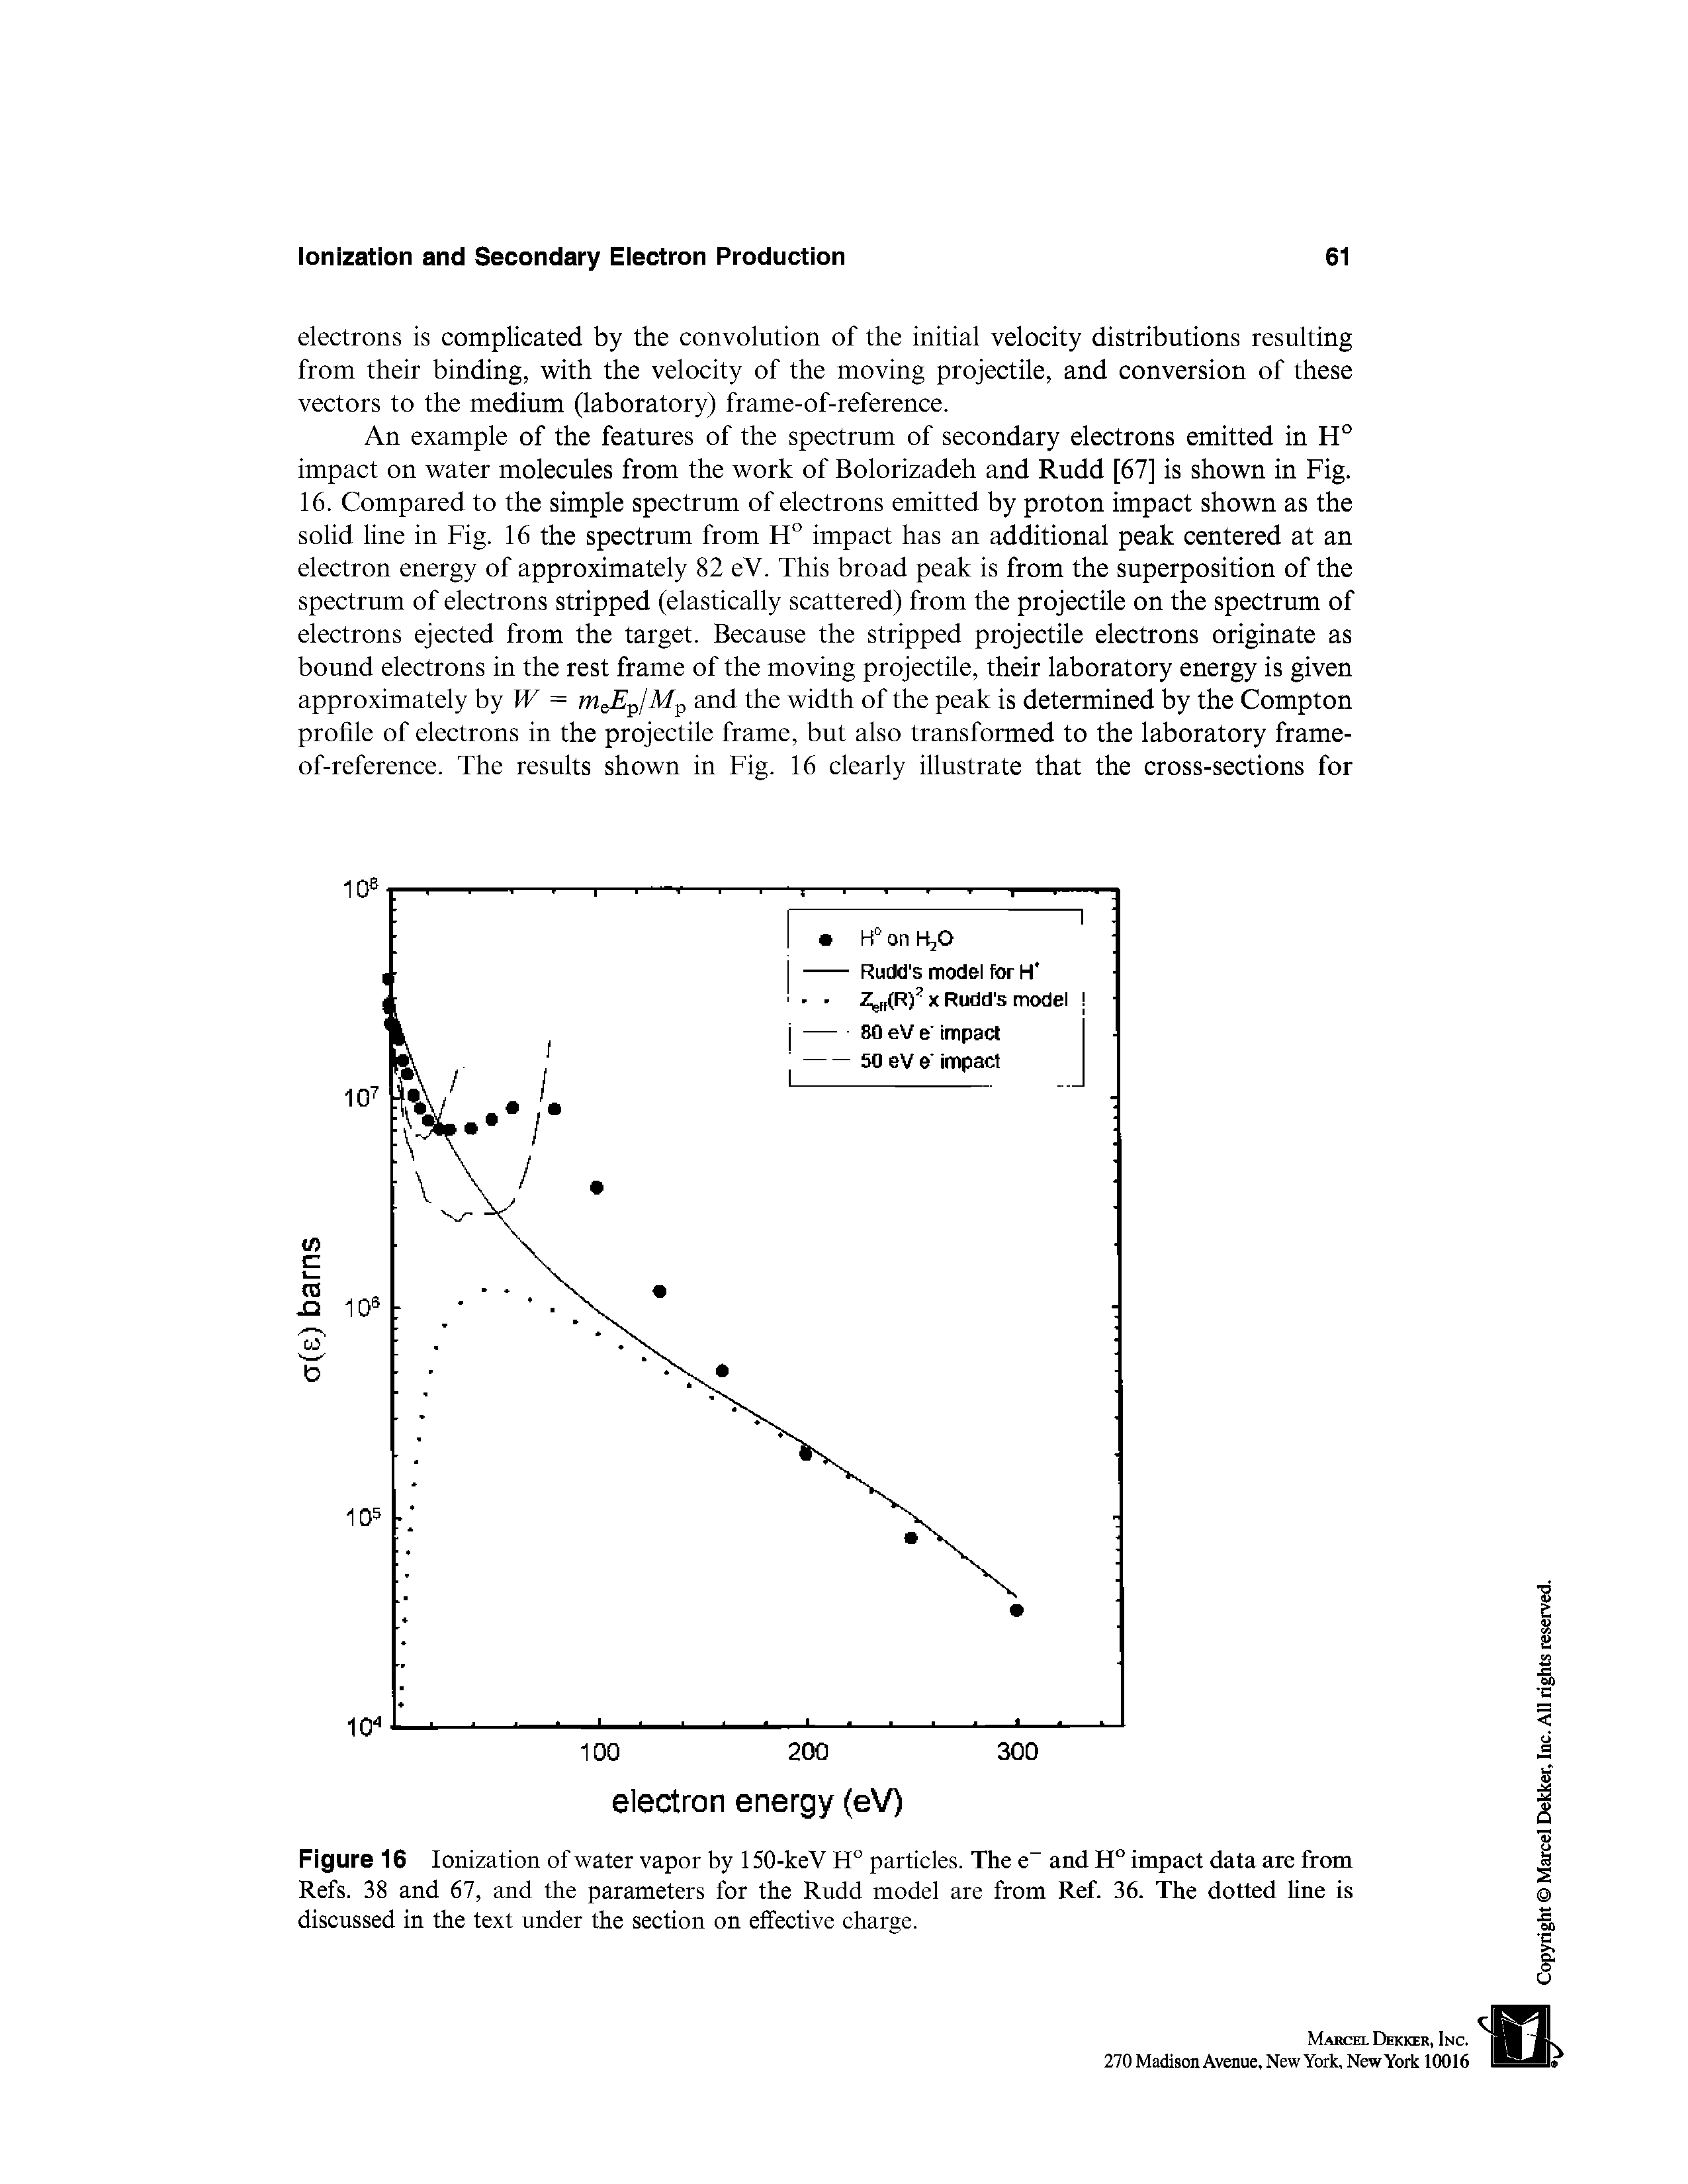 Figure 16 Ionization of water vapor by 150-keV H° particles. The e and H° impact data are from Refs. 38 and 67, and the parameters for the Rudd model are from Ref. 36. The dotted line is discussed in the text under the section on effective charge.